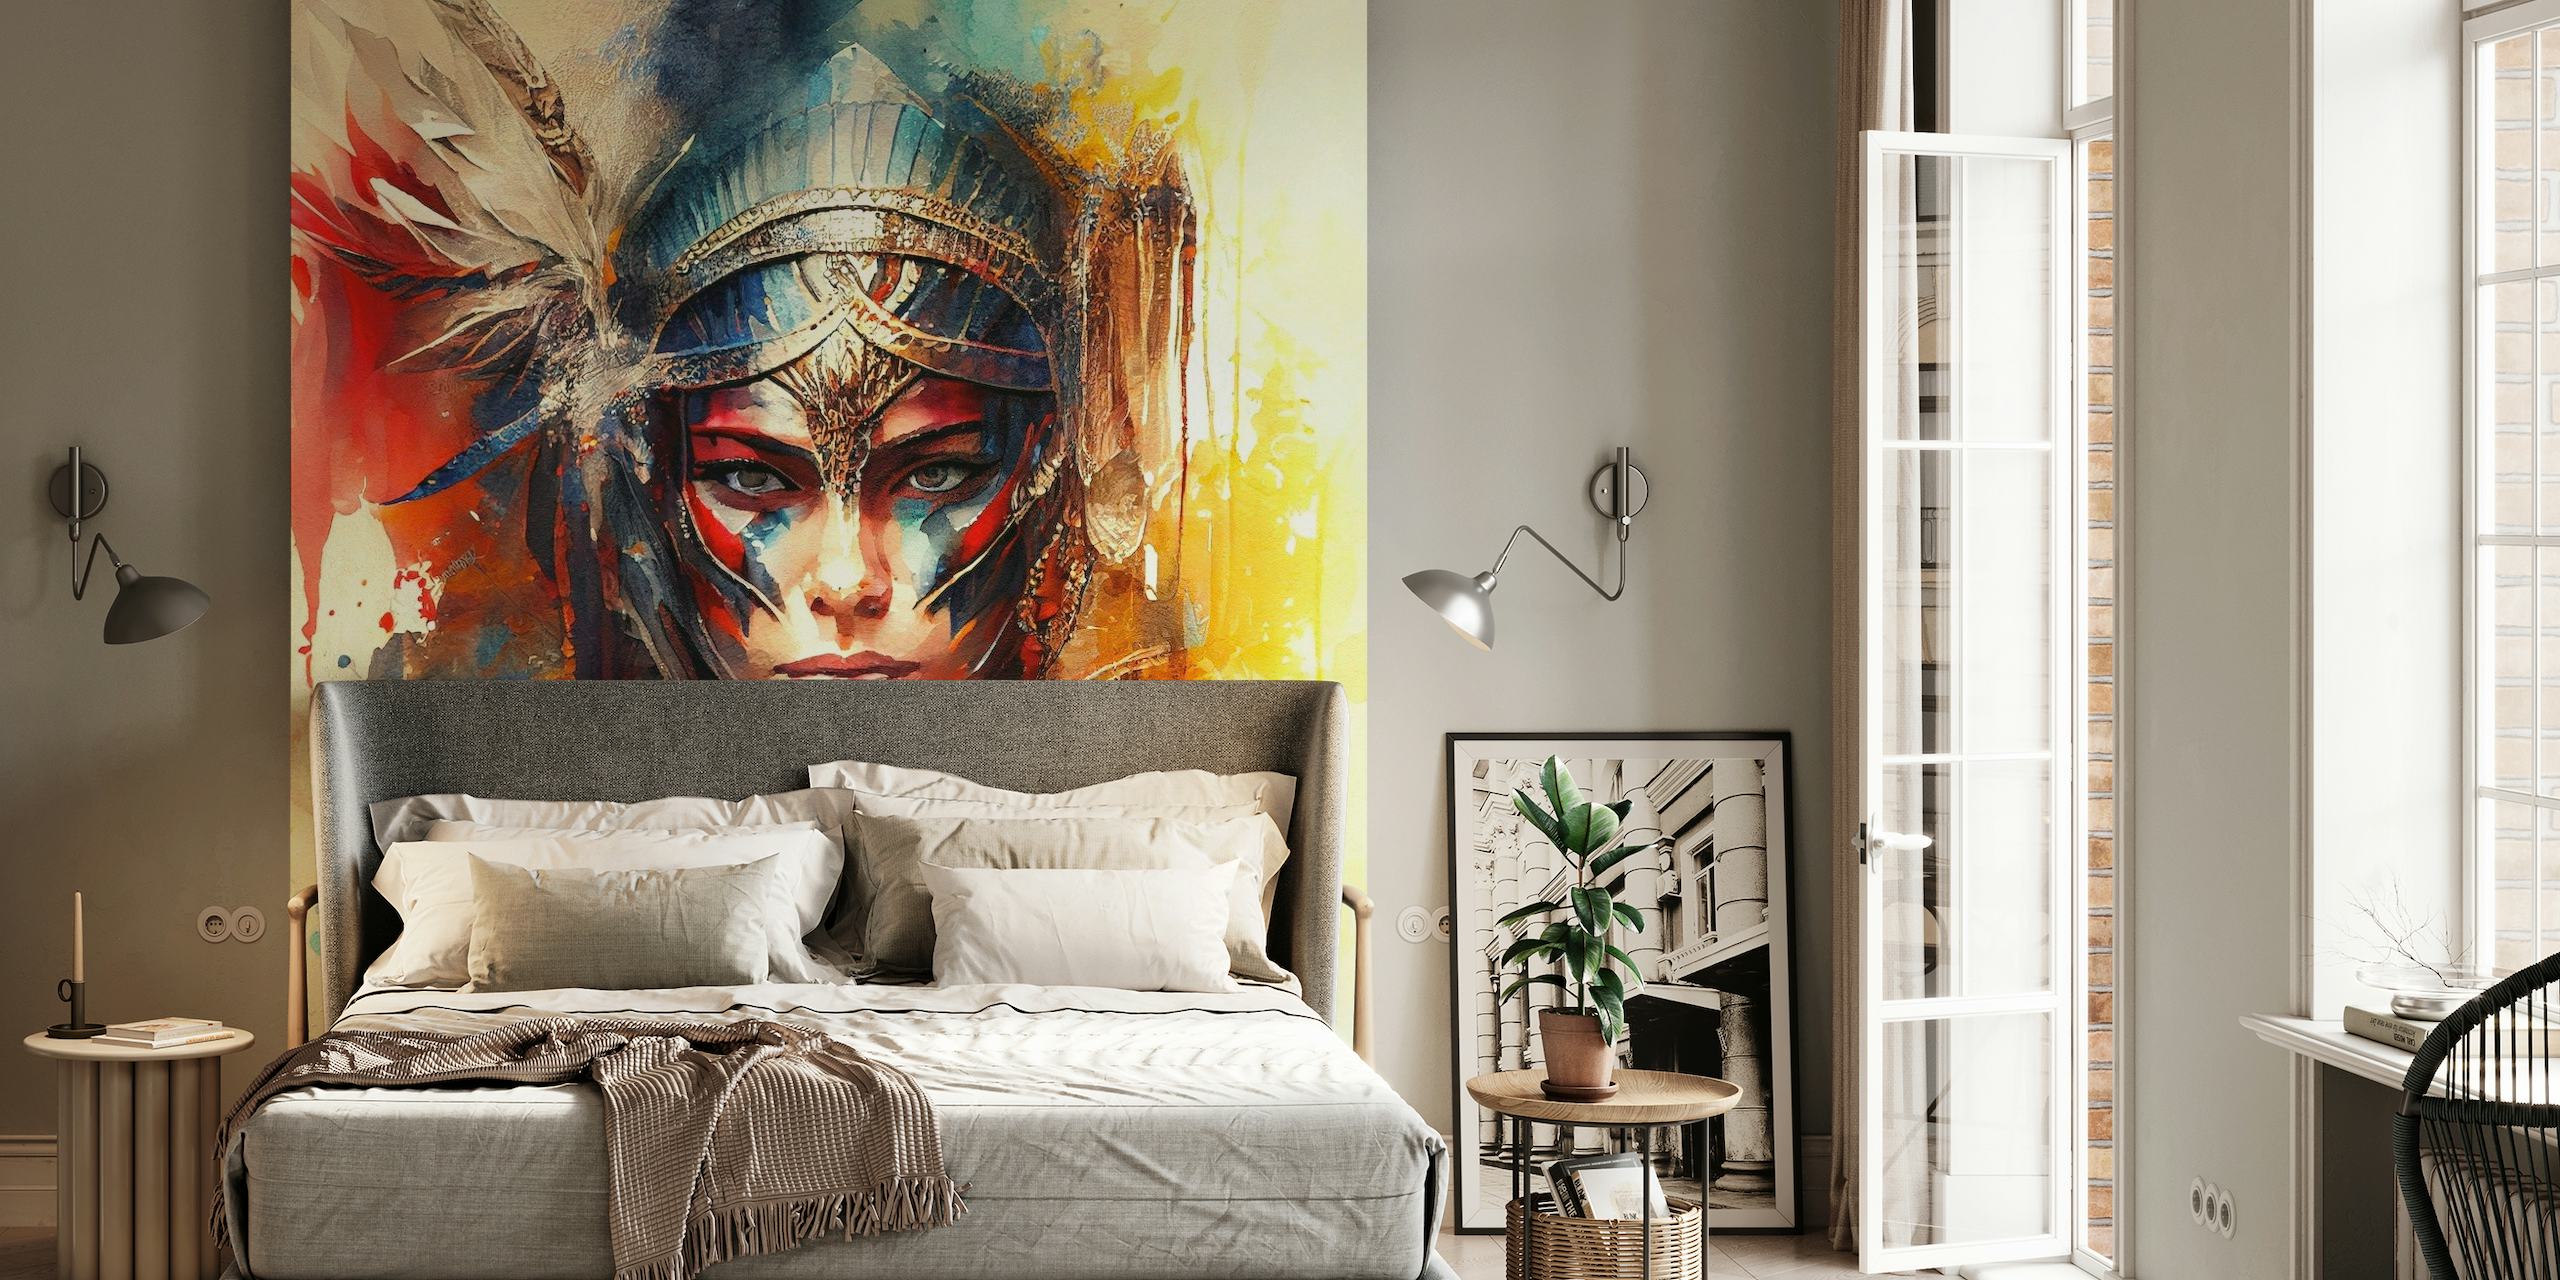 Powerful Warrior Woman wall mural with tribal paint and headdress in watercolor